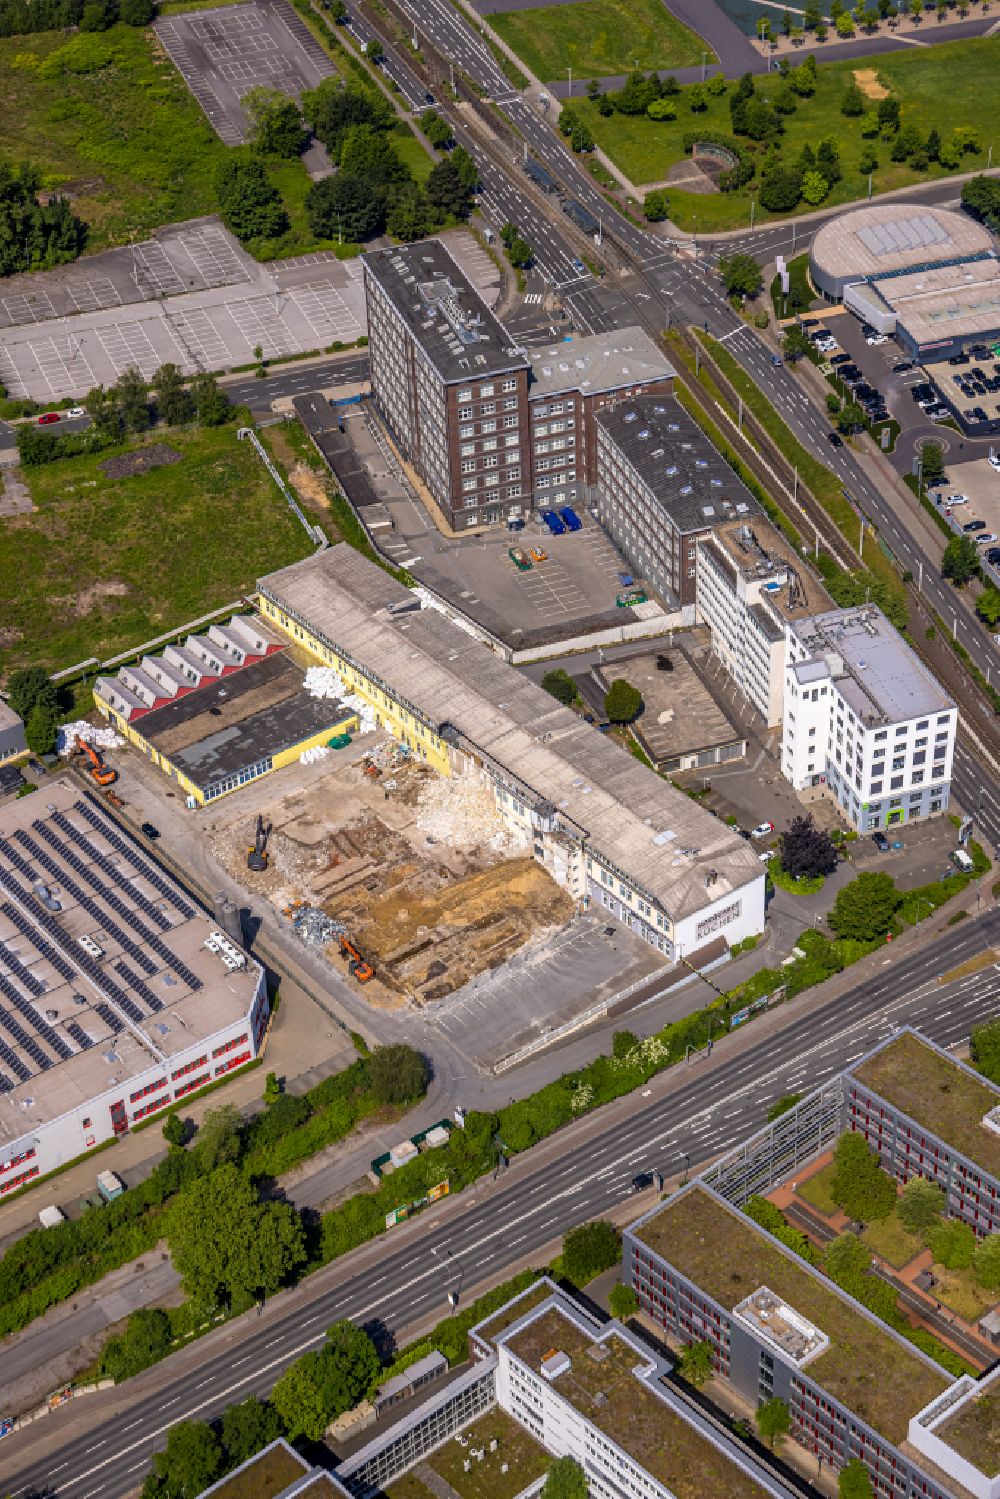 Essen from above - Demolition, demolition and unsealing work on the remains of the building resulting from blasting on Westendstrasse in the district Westviertel in Essen in the Ruhr area in the state North Rhine-Westphalia, Germany